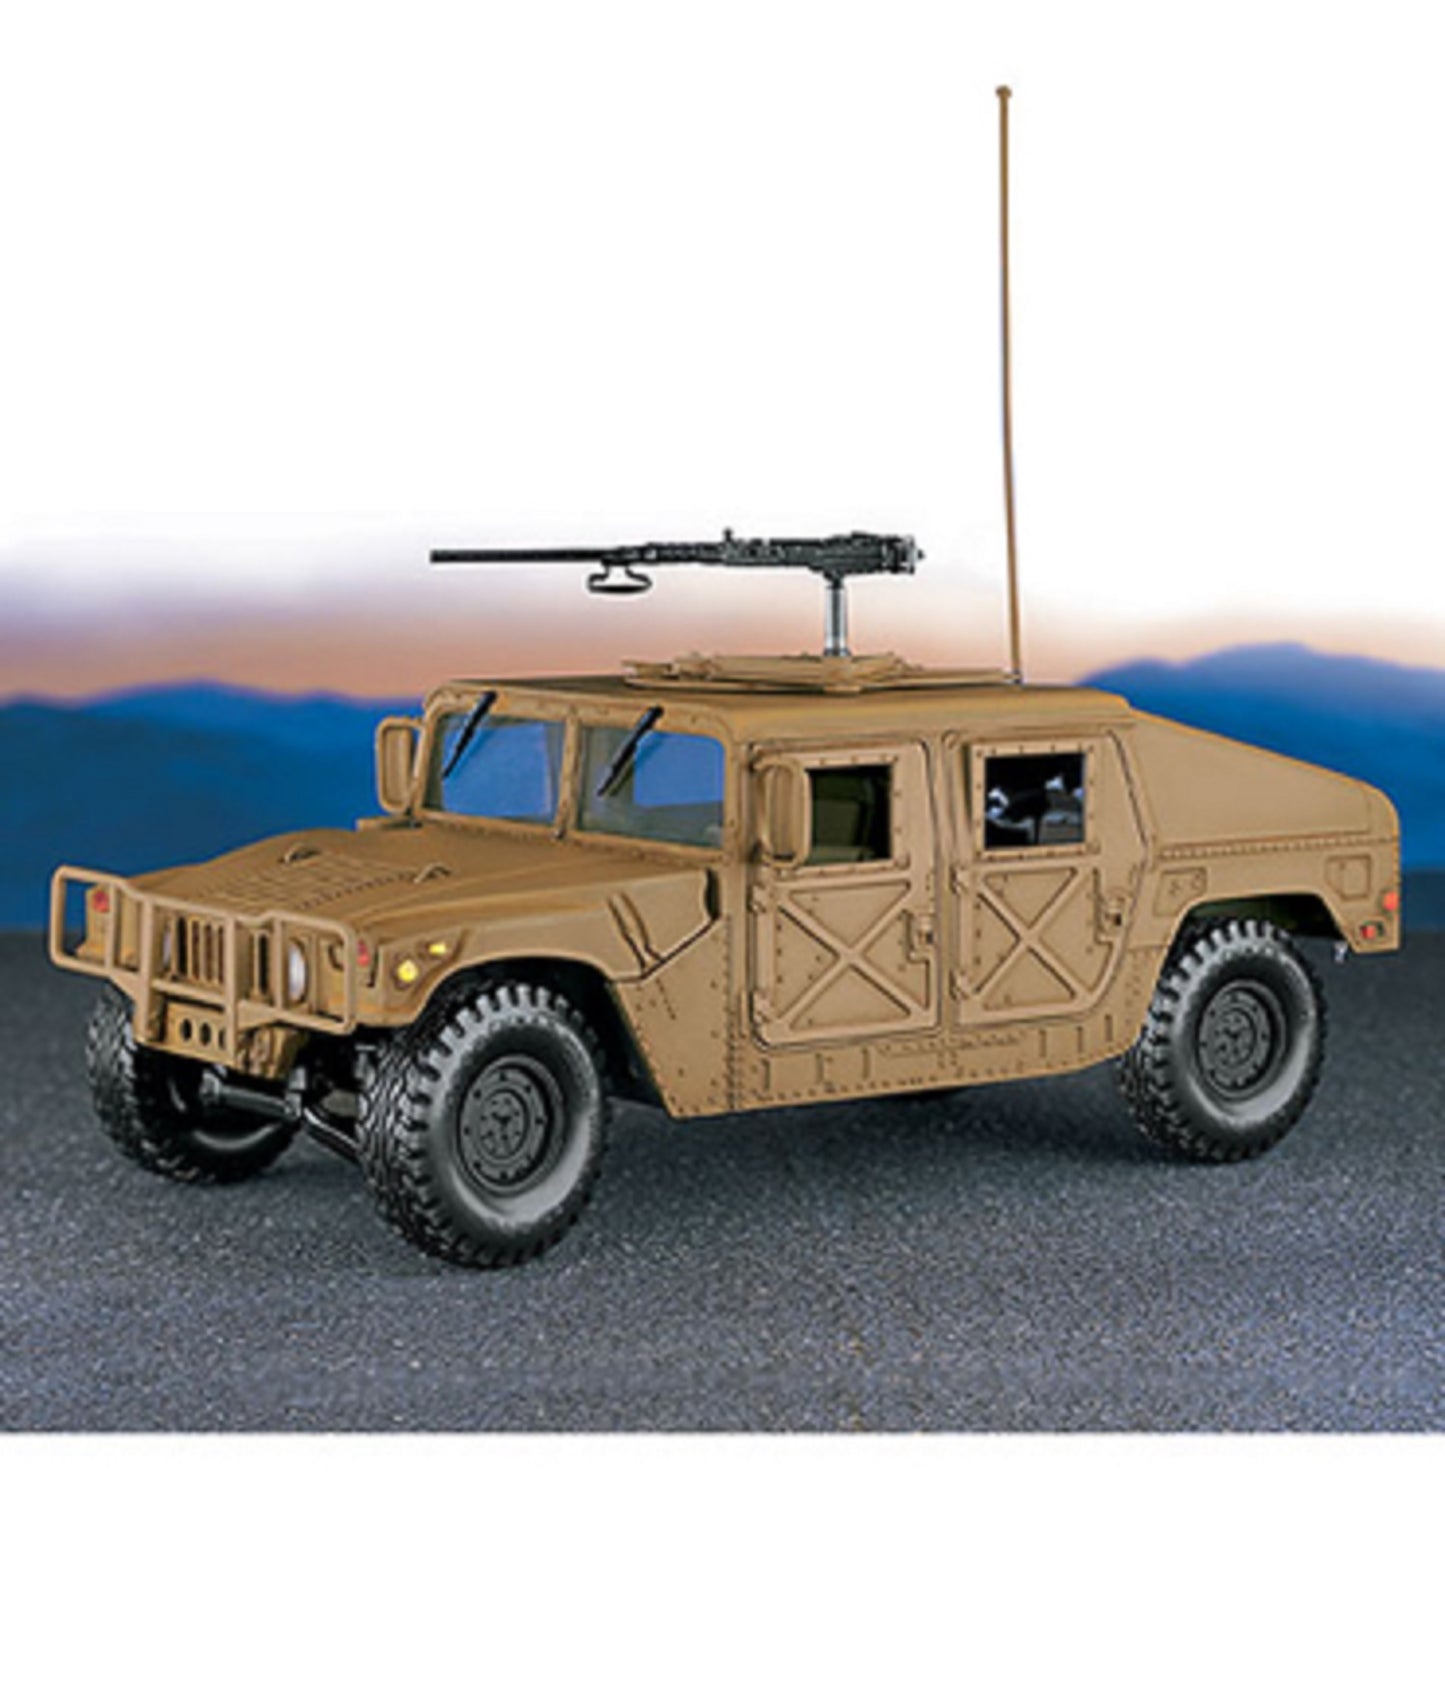 Humvee - US Army Humvee Desert Sand Camouflage Operation Desert Storm The Franklin Mint Scale 1/24